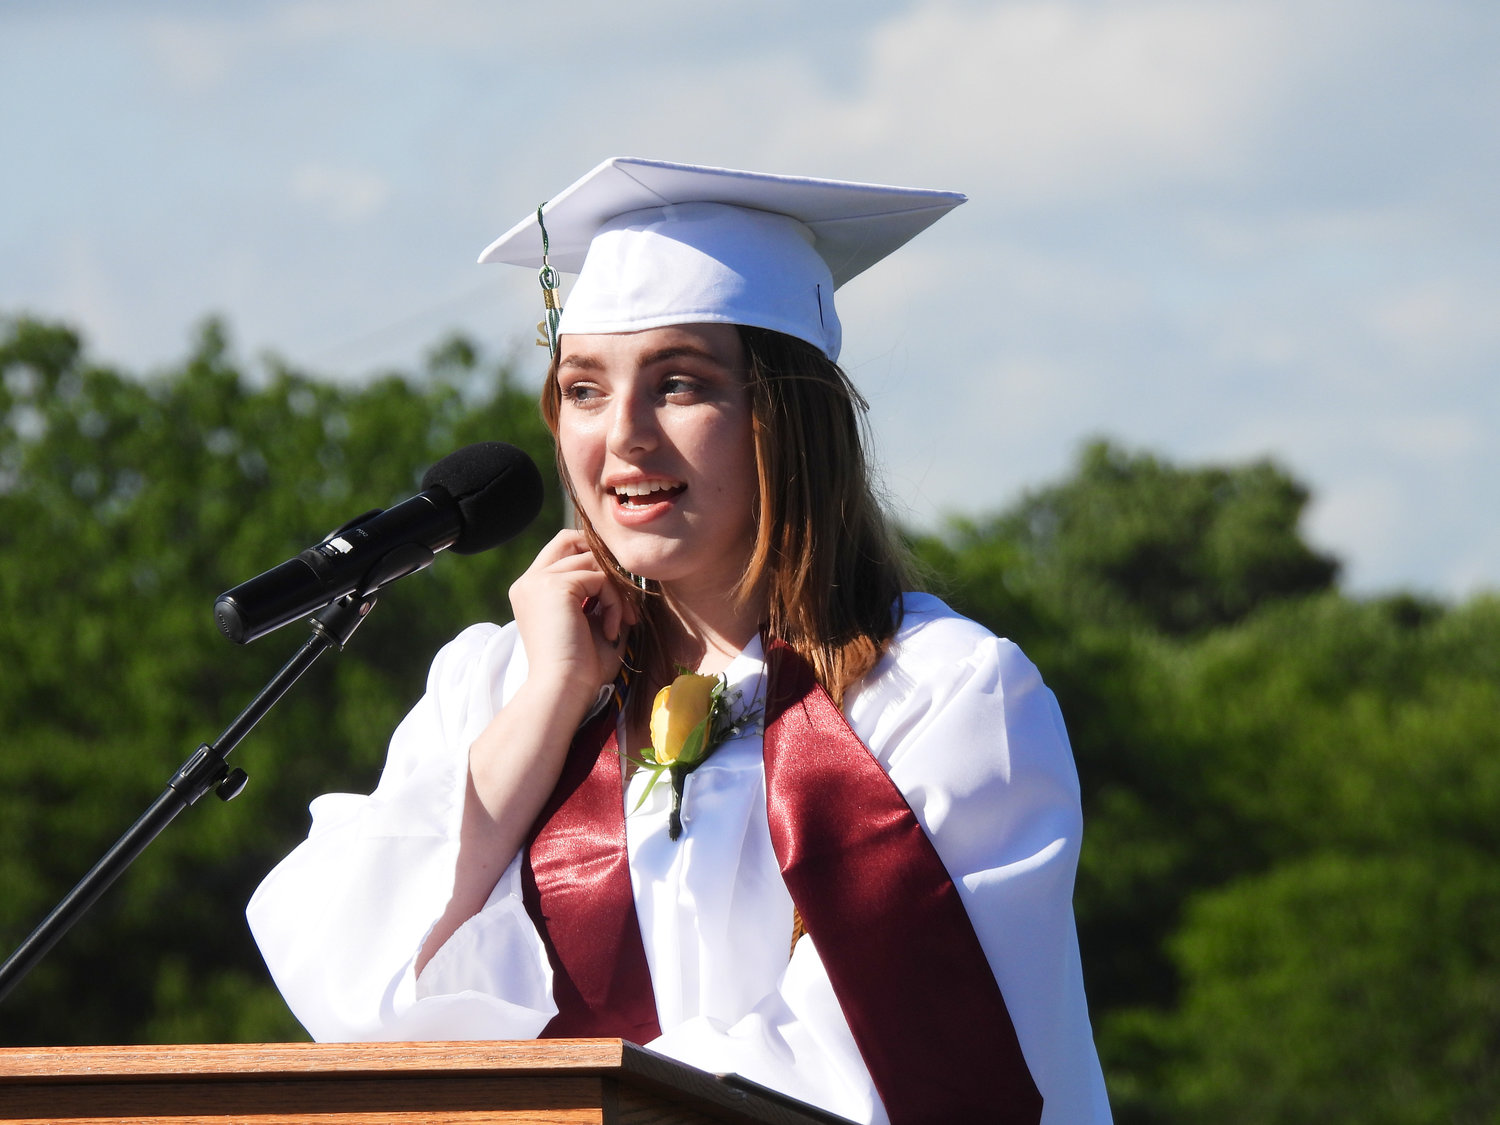 Westmoreland High School graduating seniors participated in the school's 119th annual commencement, starting the latest chapter of their lives on Friday, June 17. Carrah Sadler speaks at the Class of 2022 graduation.